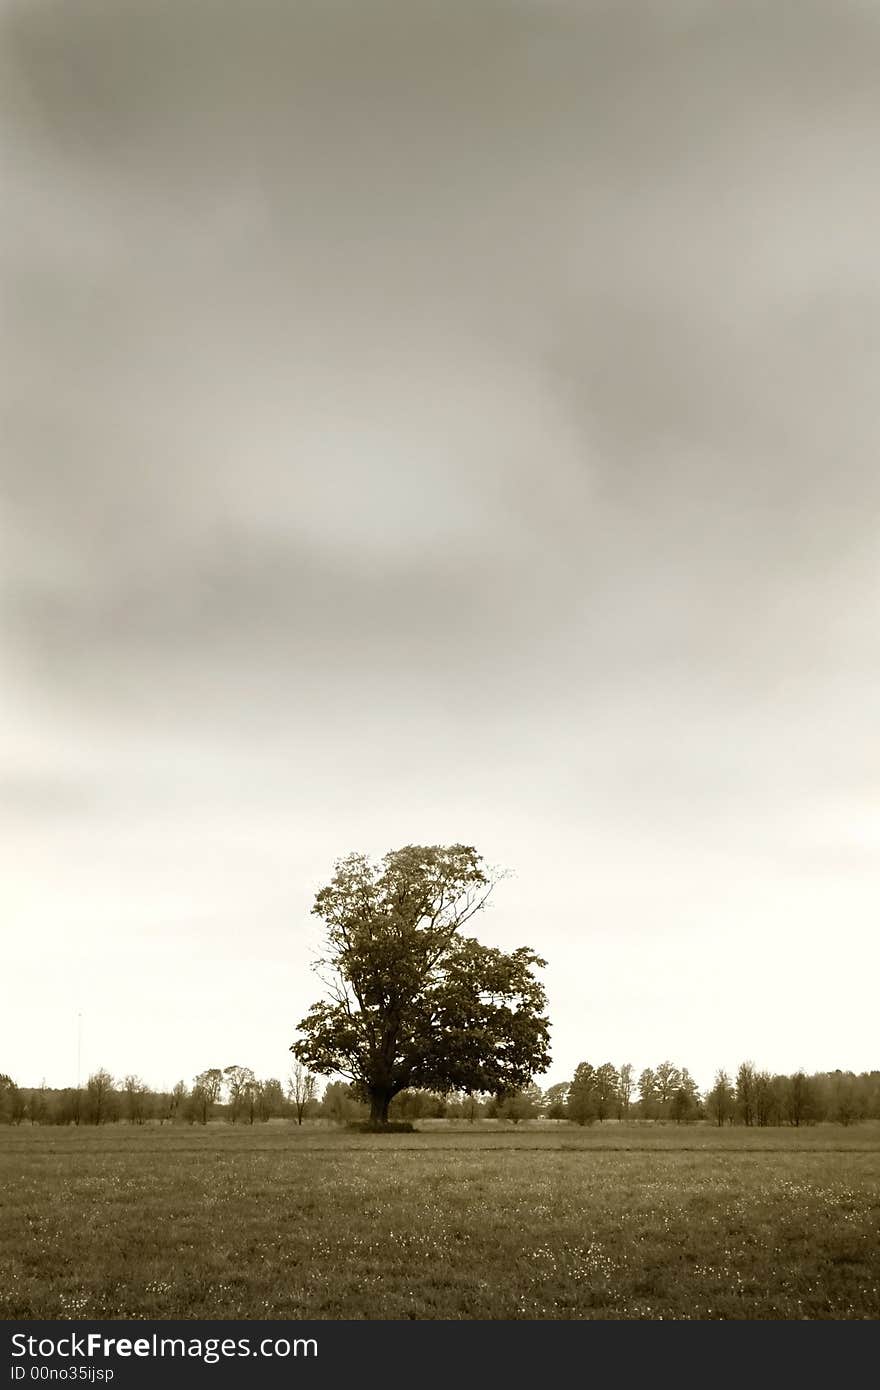 Single tree with cloudy sky background in sepia color tone. Single tree with cloudy sky background in sepia color tone